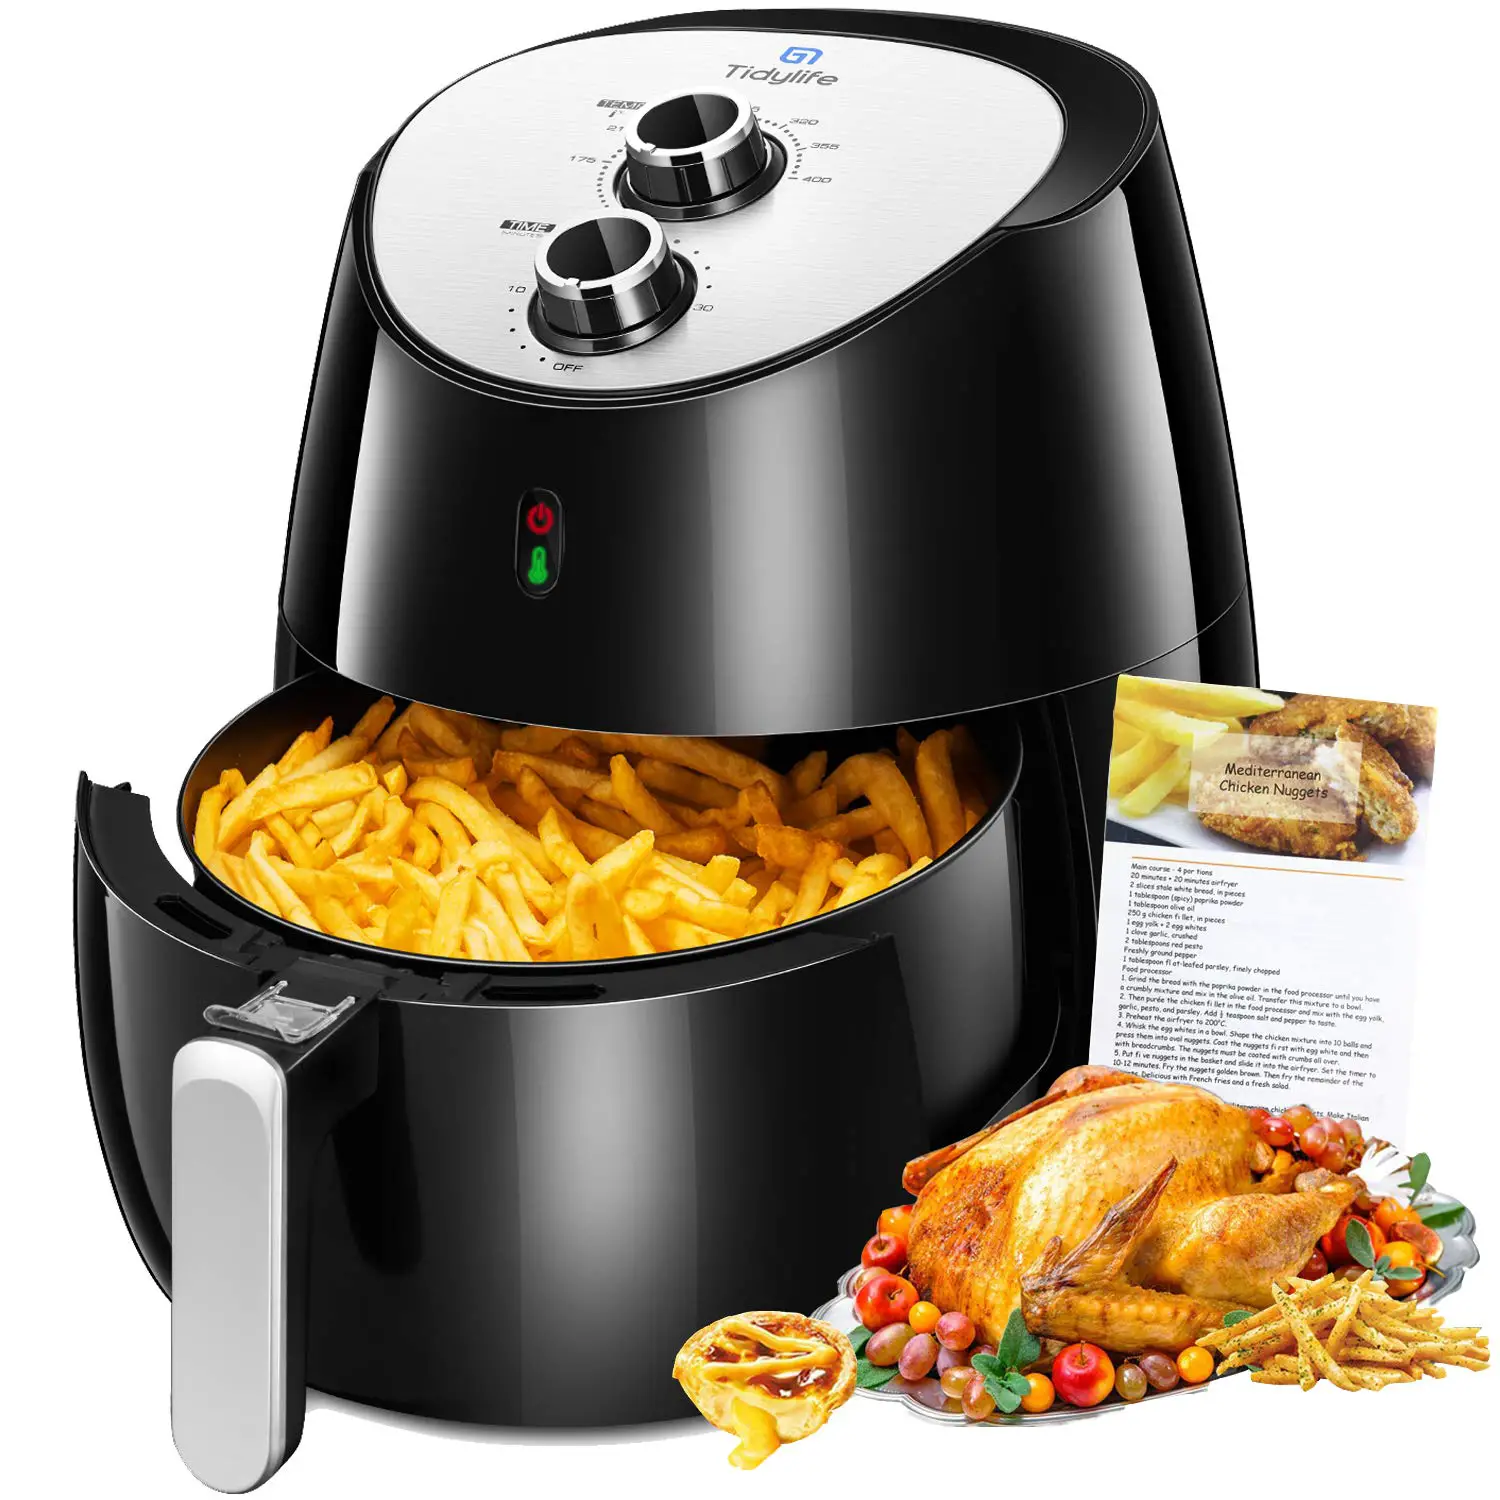 The Best What Can You Cook In A Nuwave Air Fryer